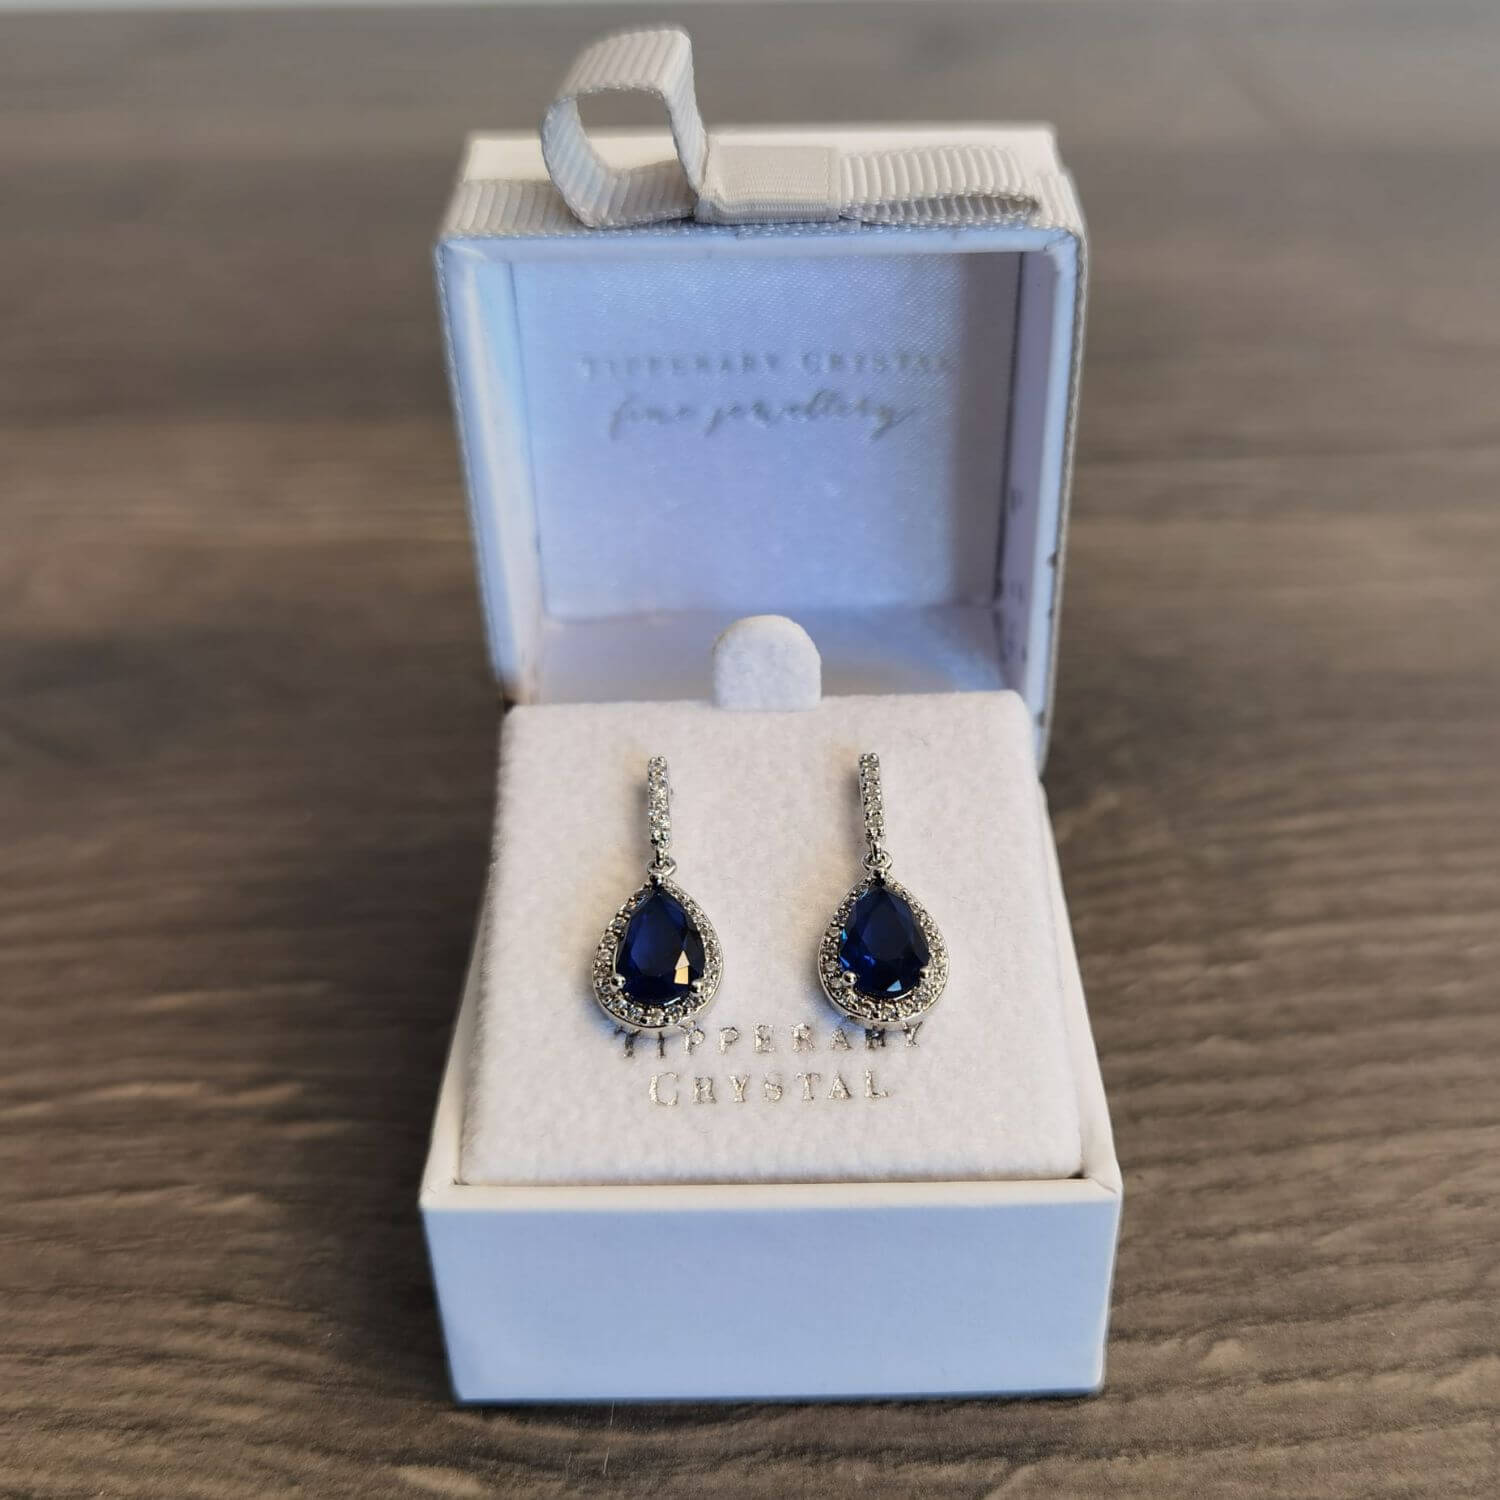 Tipperary Jewellery Pear Shaped Earrings - Blue - Silver 3 Shaws Department Stores